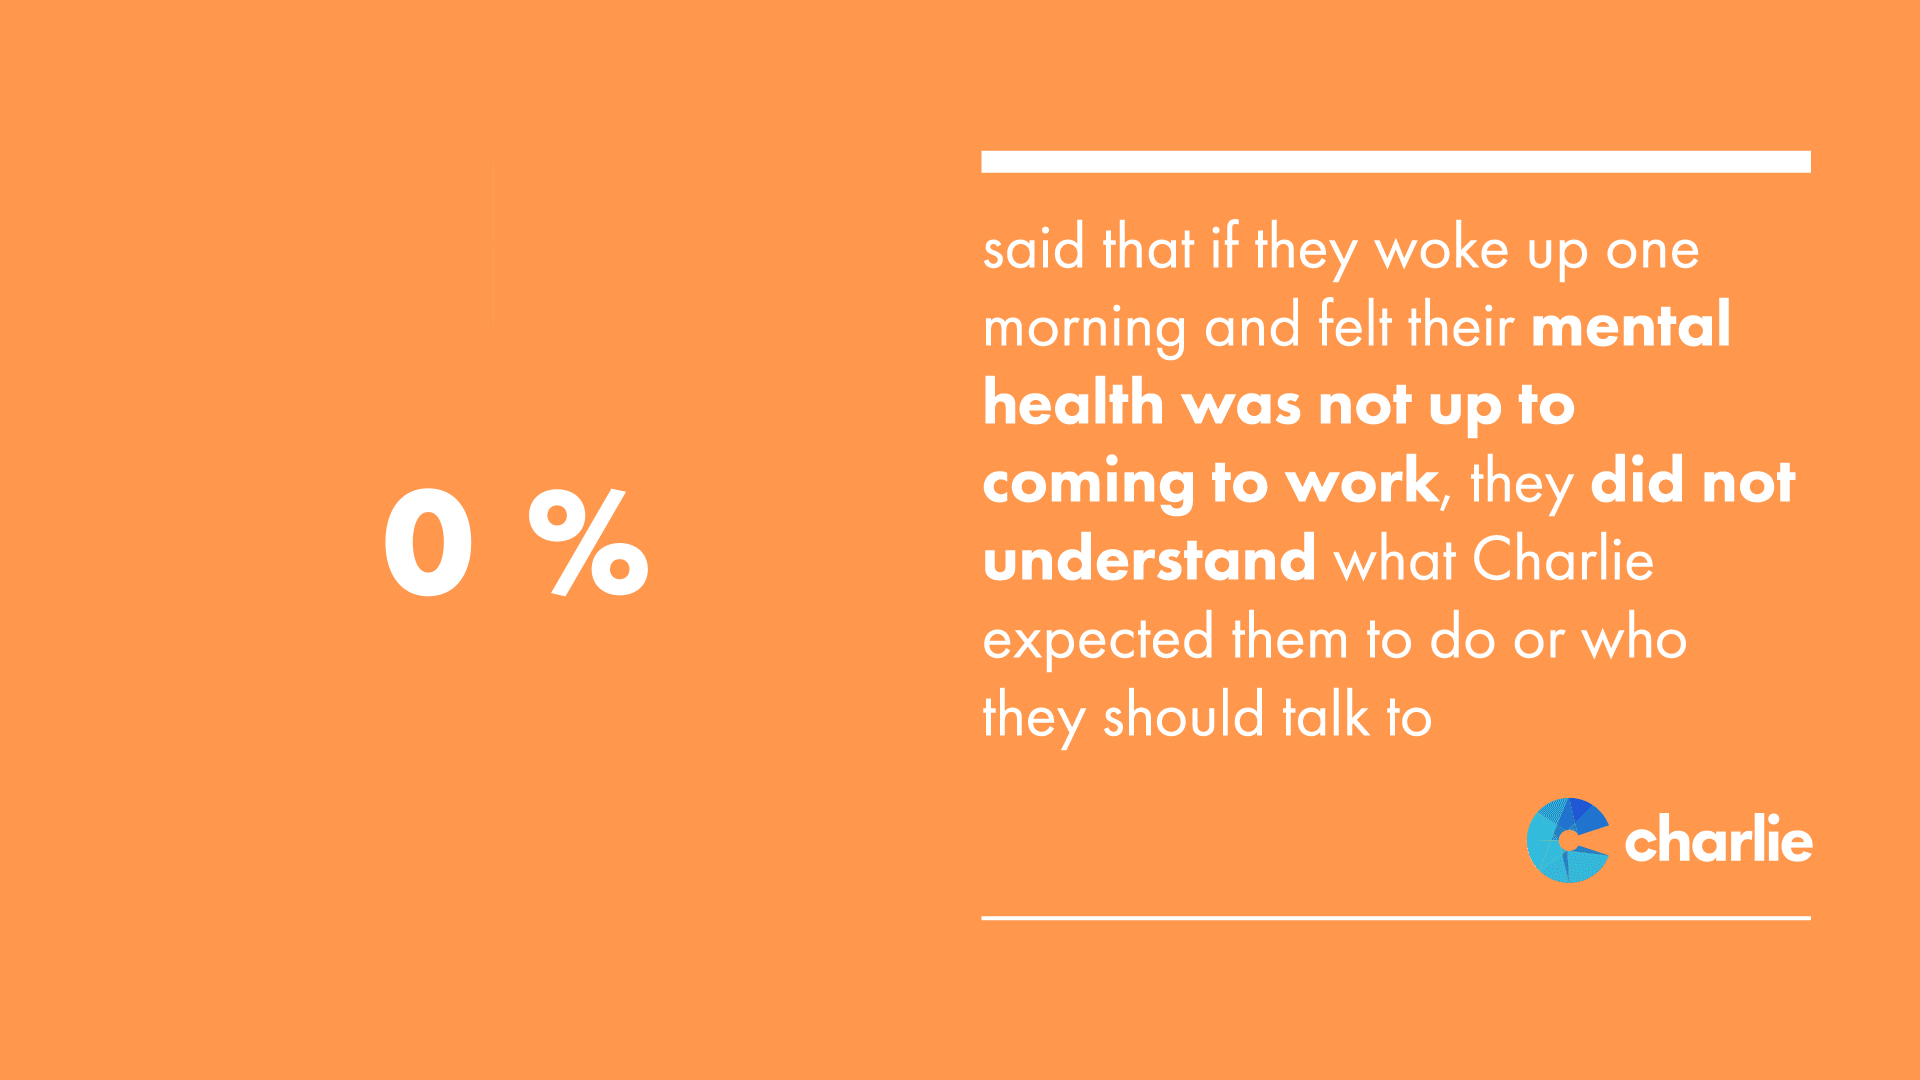 44% did not understand what was expected of them when they woke up feeling poorly